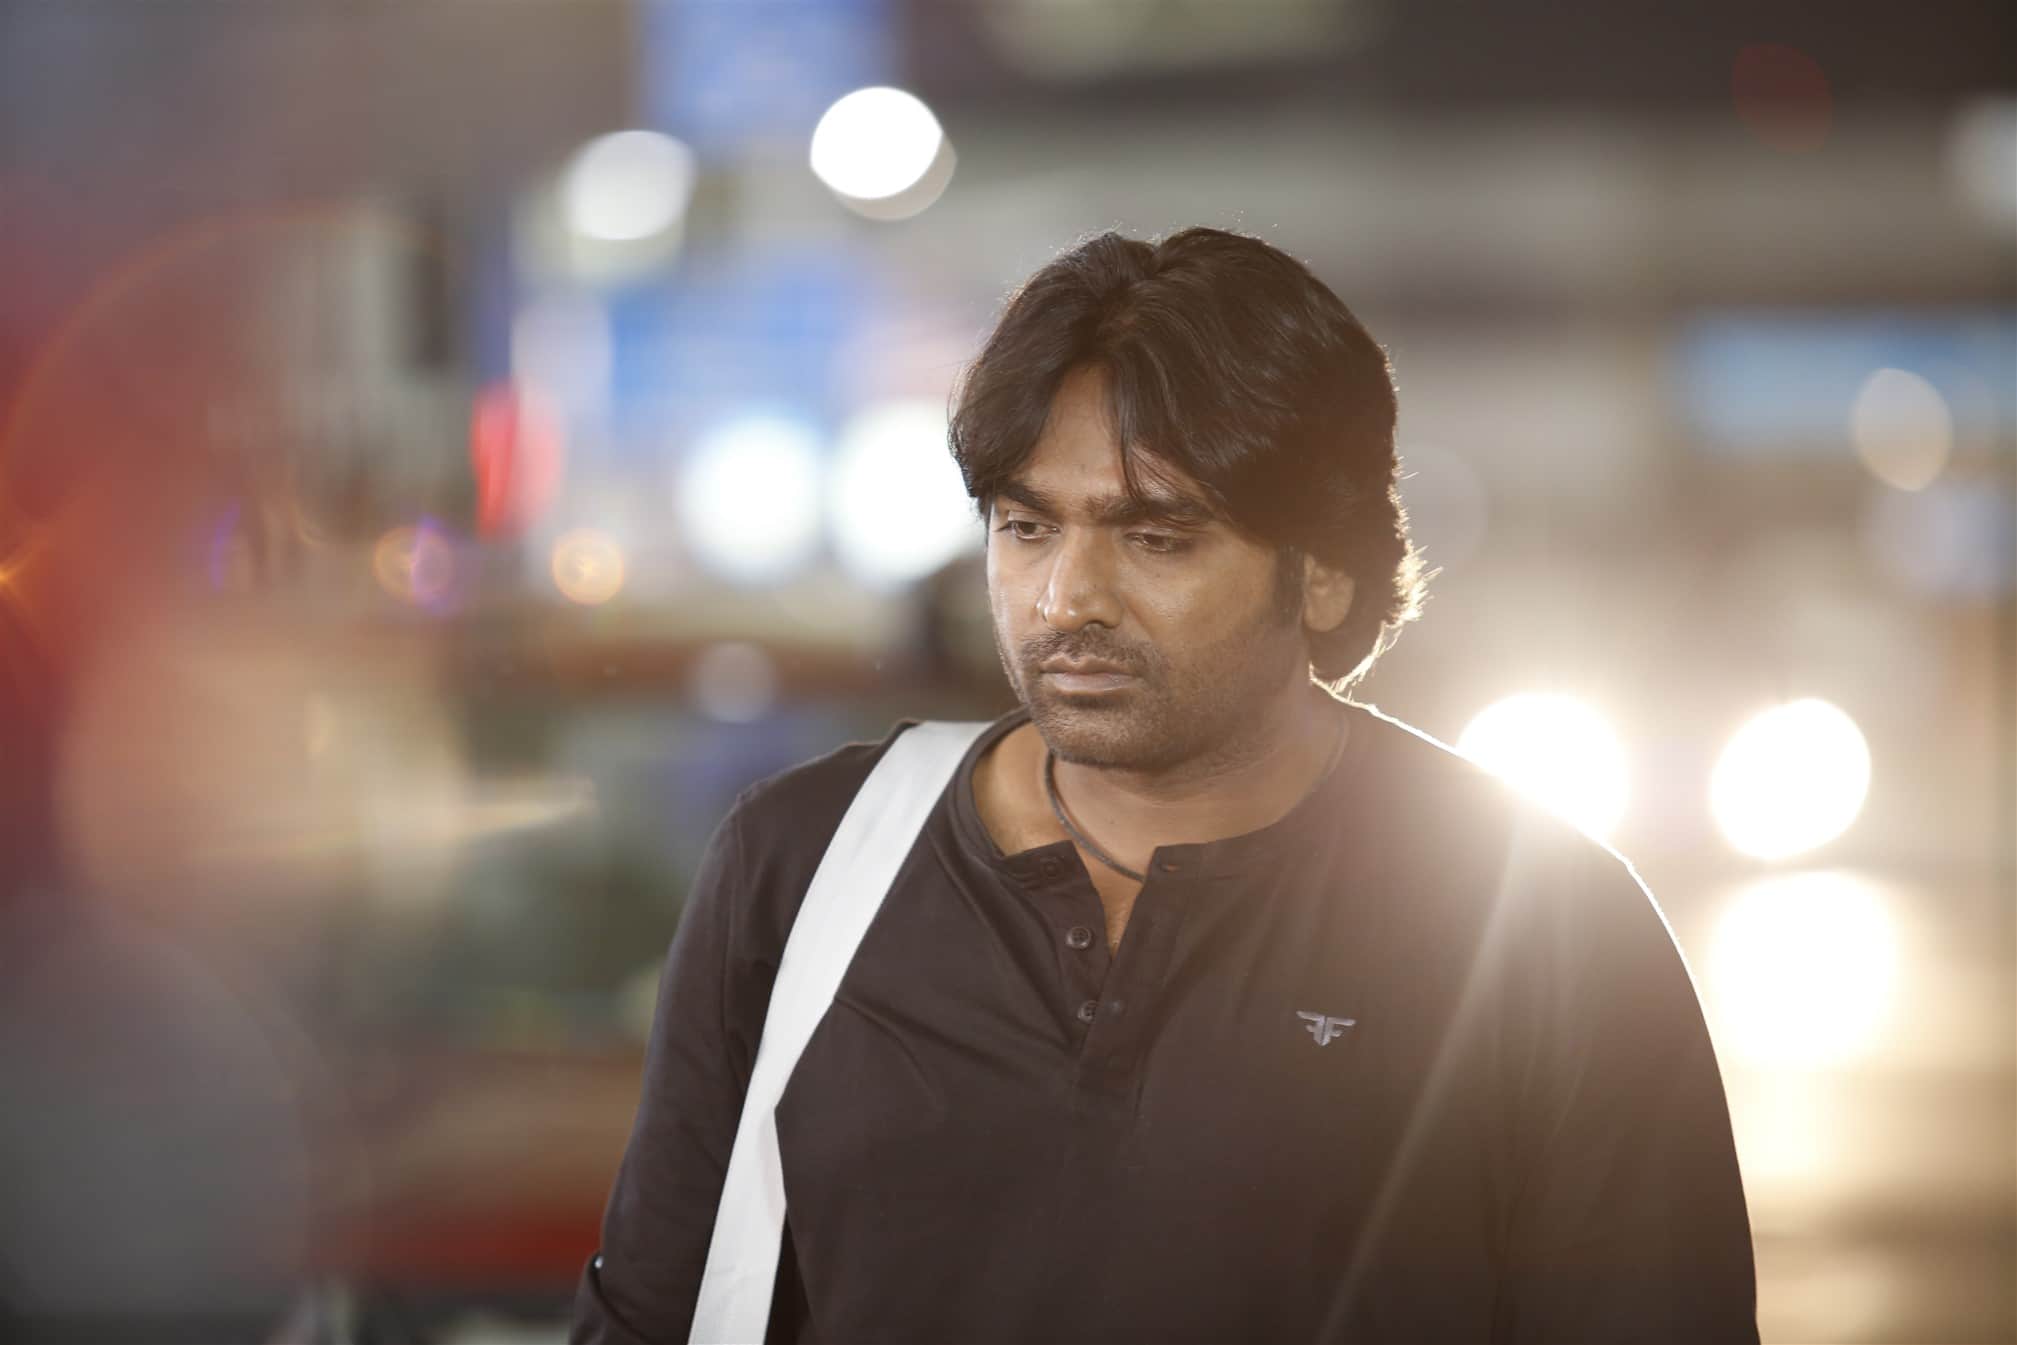 vijay sethupathy tweets in support of nalini and six others